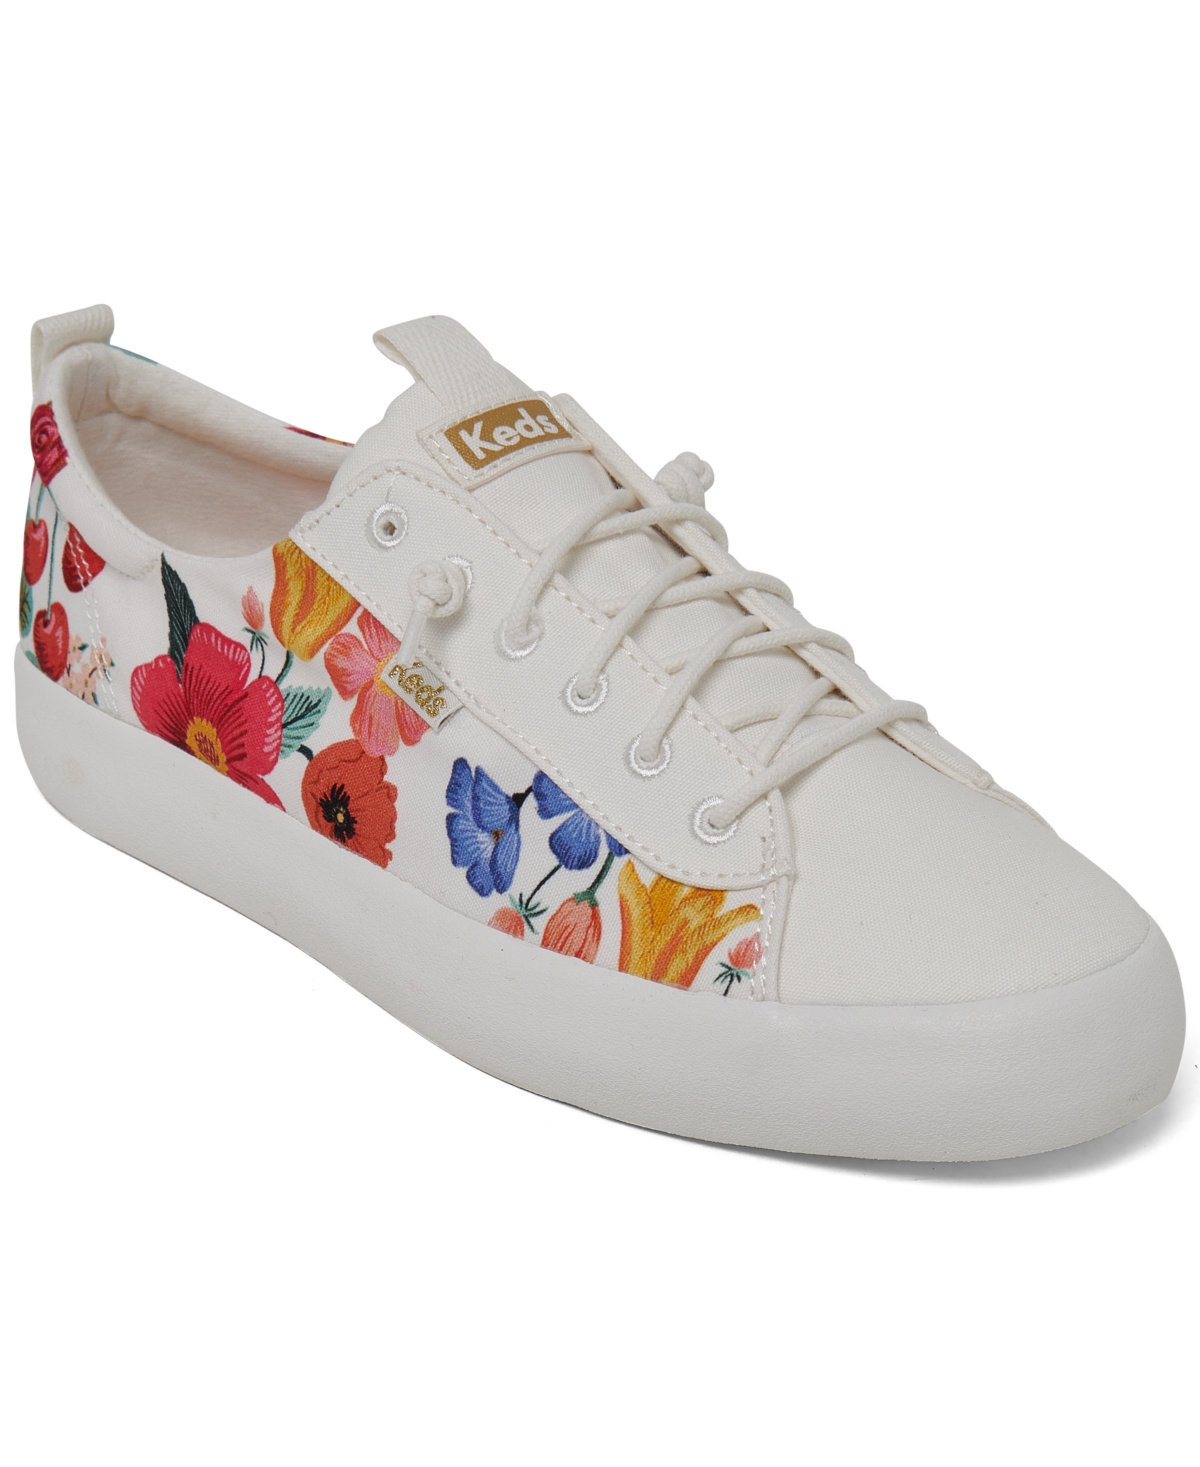 Women's x Rifle Paper Co Kickback Canvas Casual Sneakers from Finish Line - White